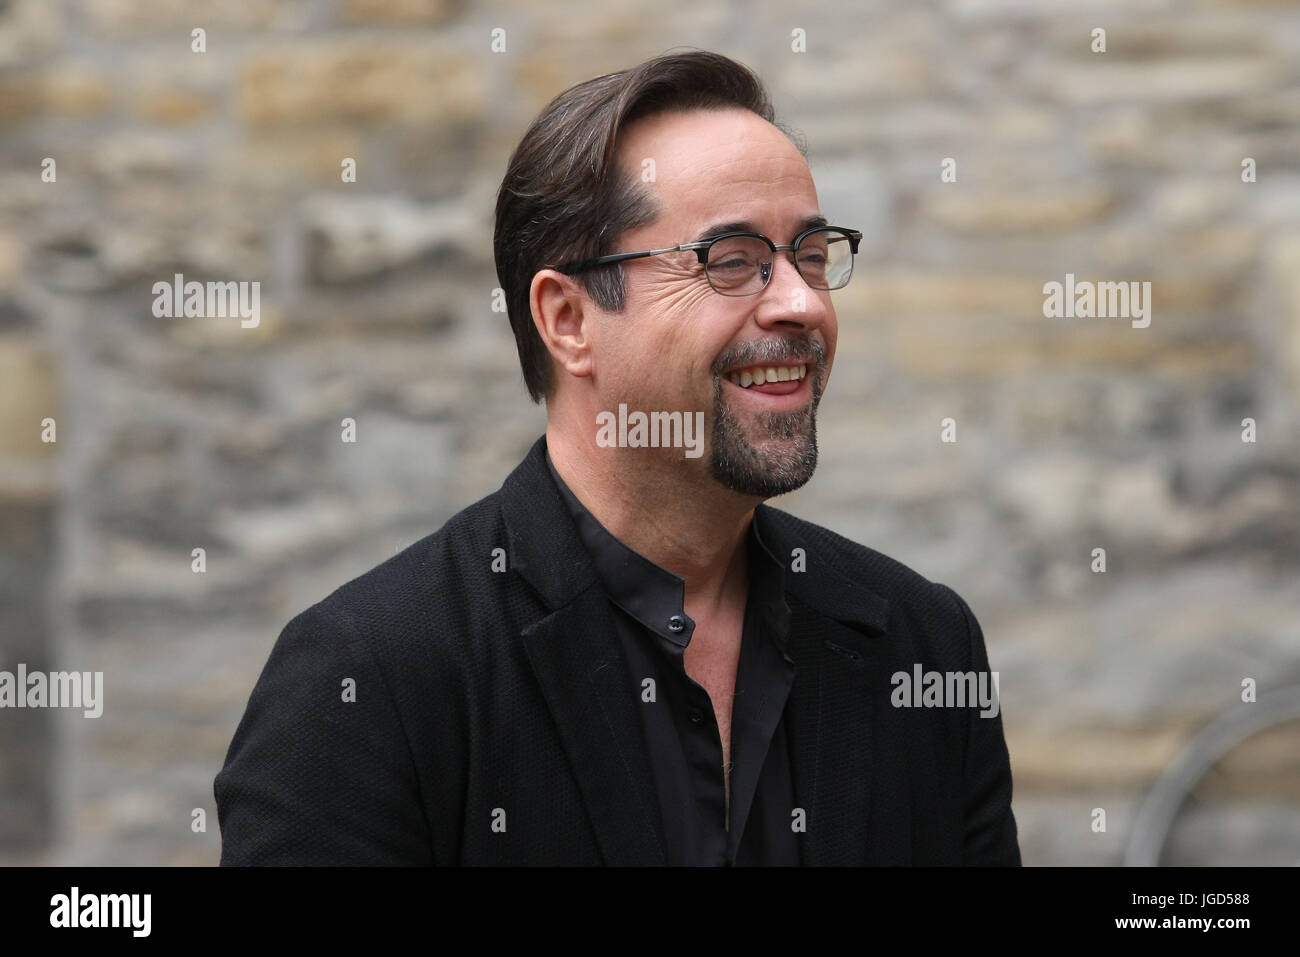 Muenster, Germany. 05th July, 2017. Actor Jan Josef Liefers pose during a photocall on set of the WDR Tatort 'Gott ist auch nur ein Mensch' on July 5, 2017 in Muenster, Germany. Credit: Maik Boenisch/Pacific Press/Alamy Live News Stock Photo